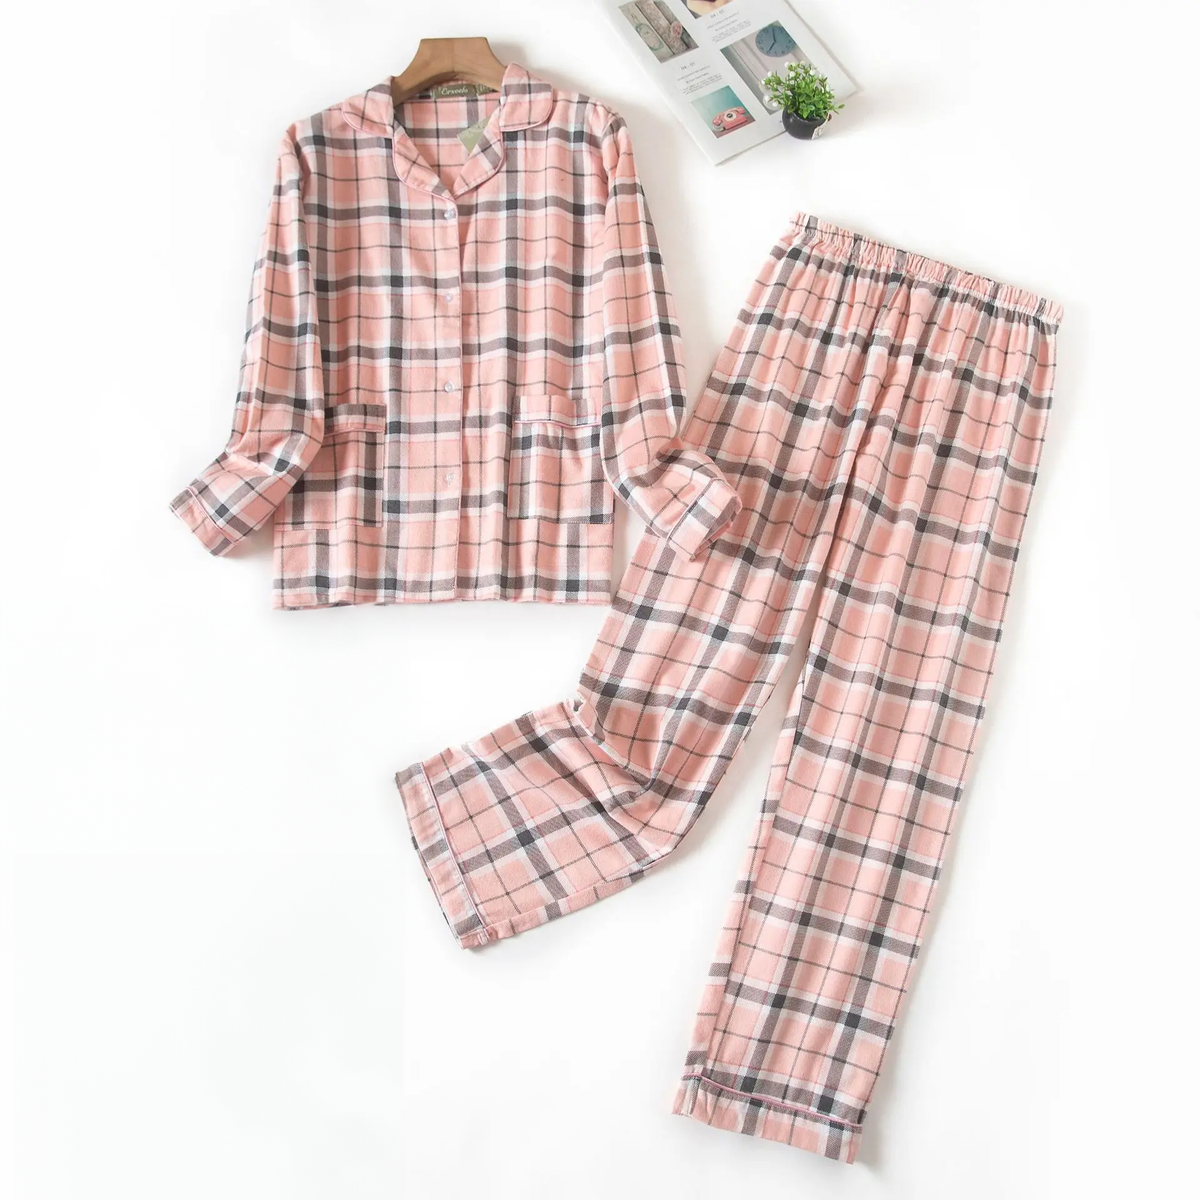 Ruby Winter Plaid 100% Cotton Pajamas | Hypoallergenic - Allergy Friendly - Naturally Free